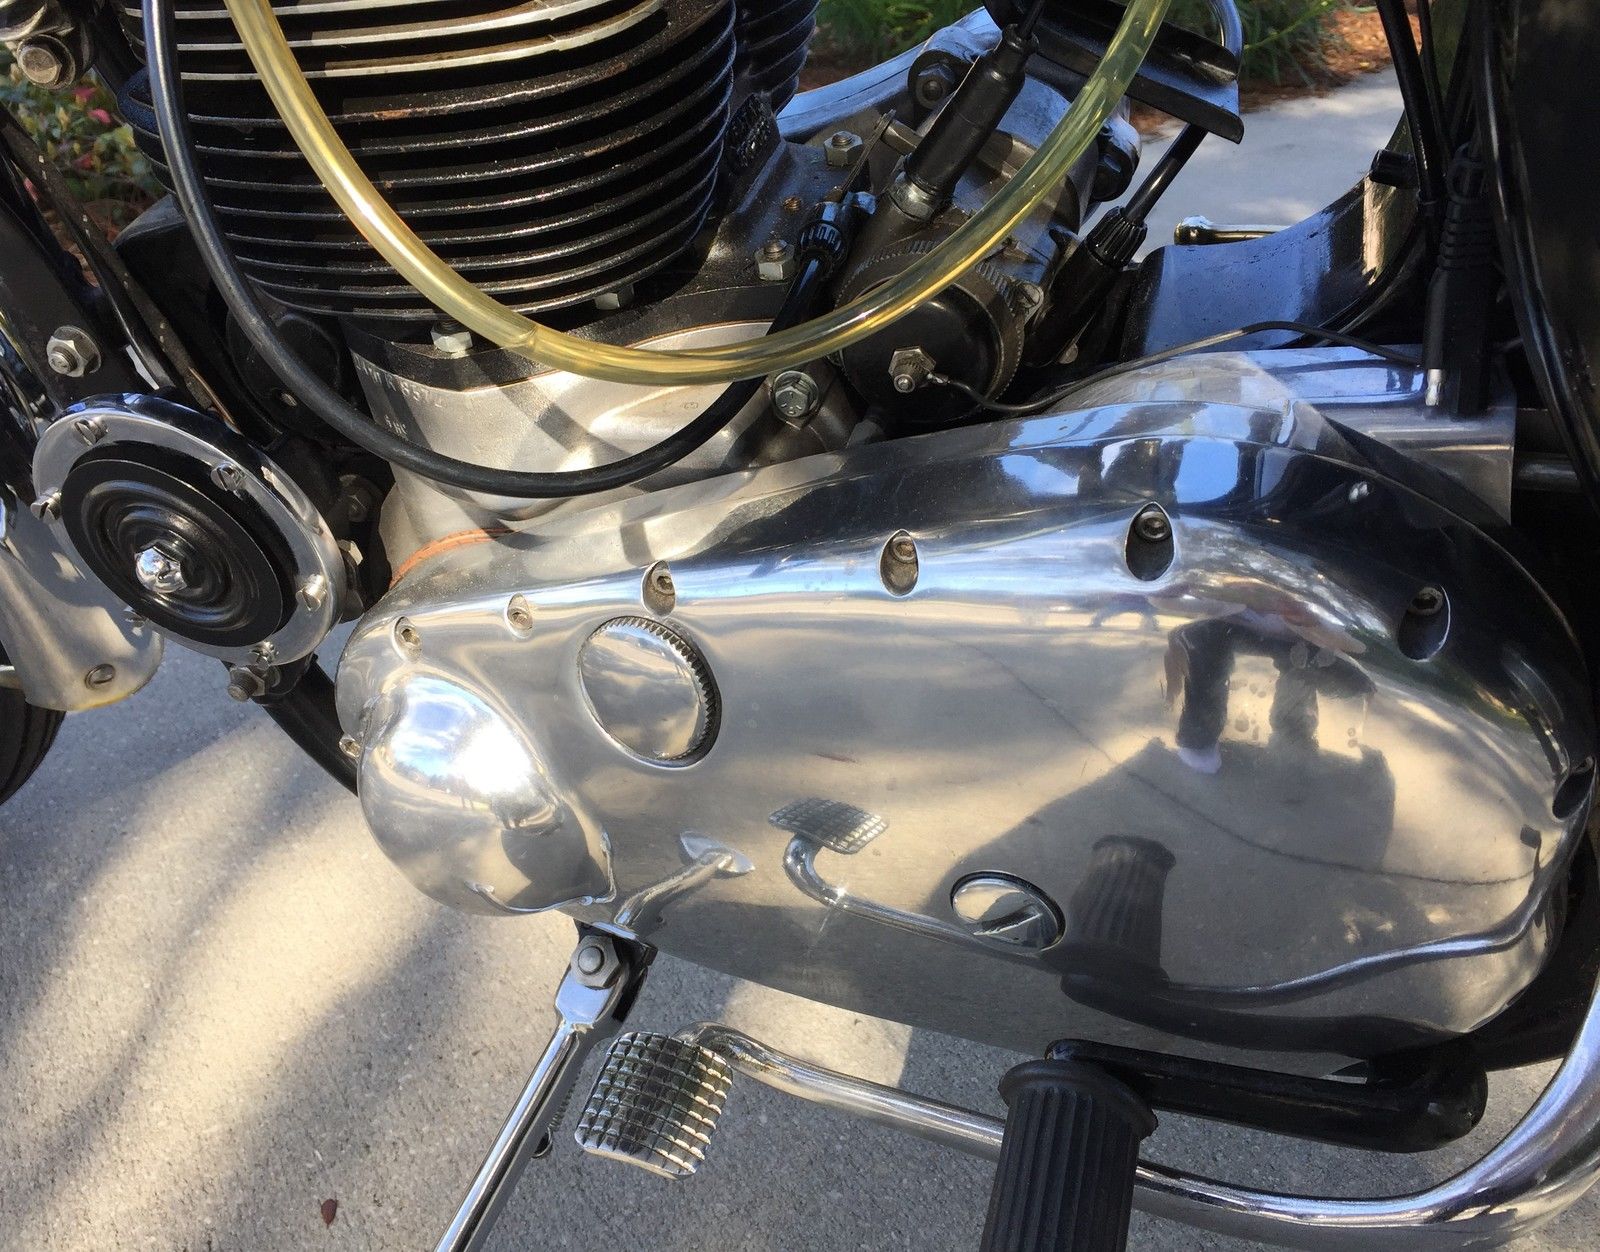 BSA A10 Super Rocket - 1963 - Engine and Gearbox, Brake Pedal, Footrest, Primary Chain Cover and Cable.